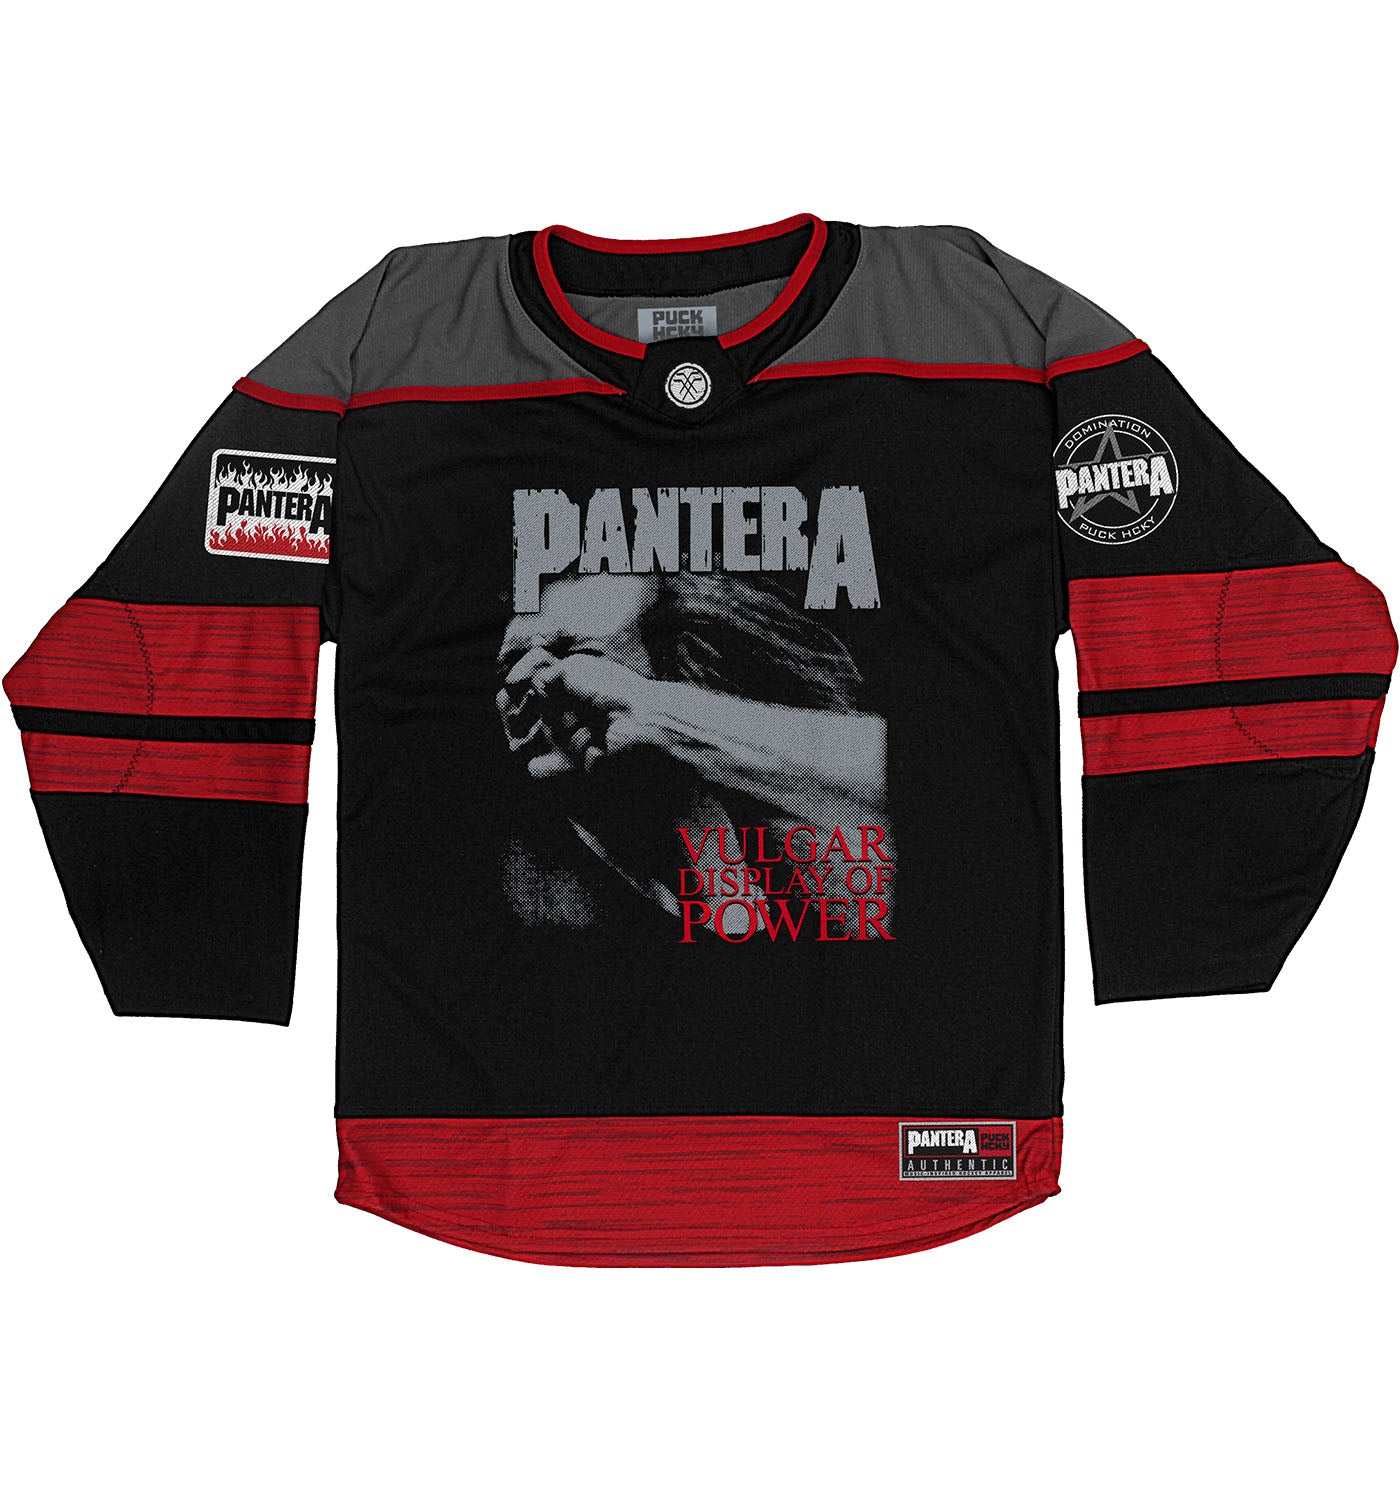 PANTERA 'A VULGAR DISPLAY' hockey jersey in black, charcoal grey, and red front view